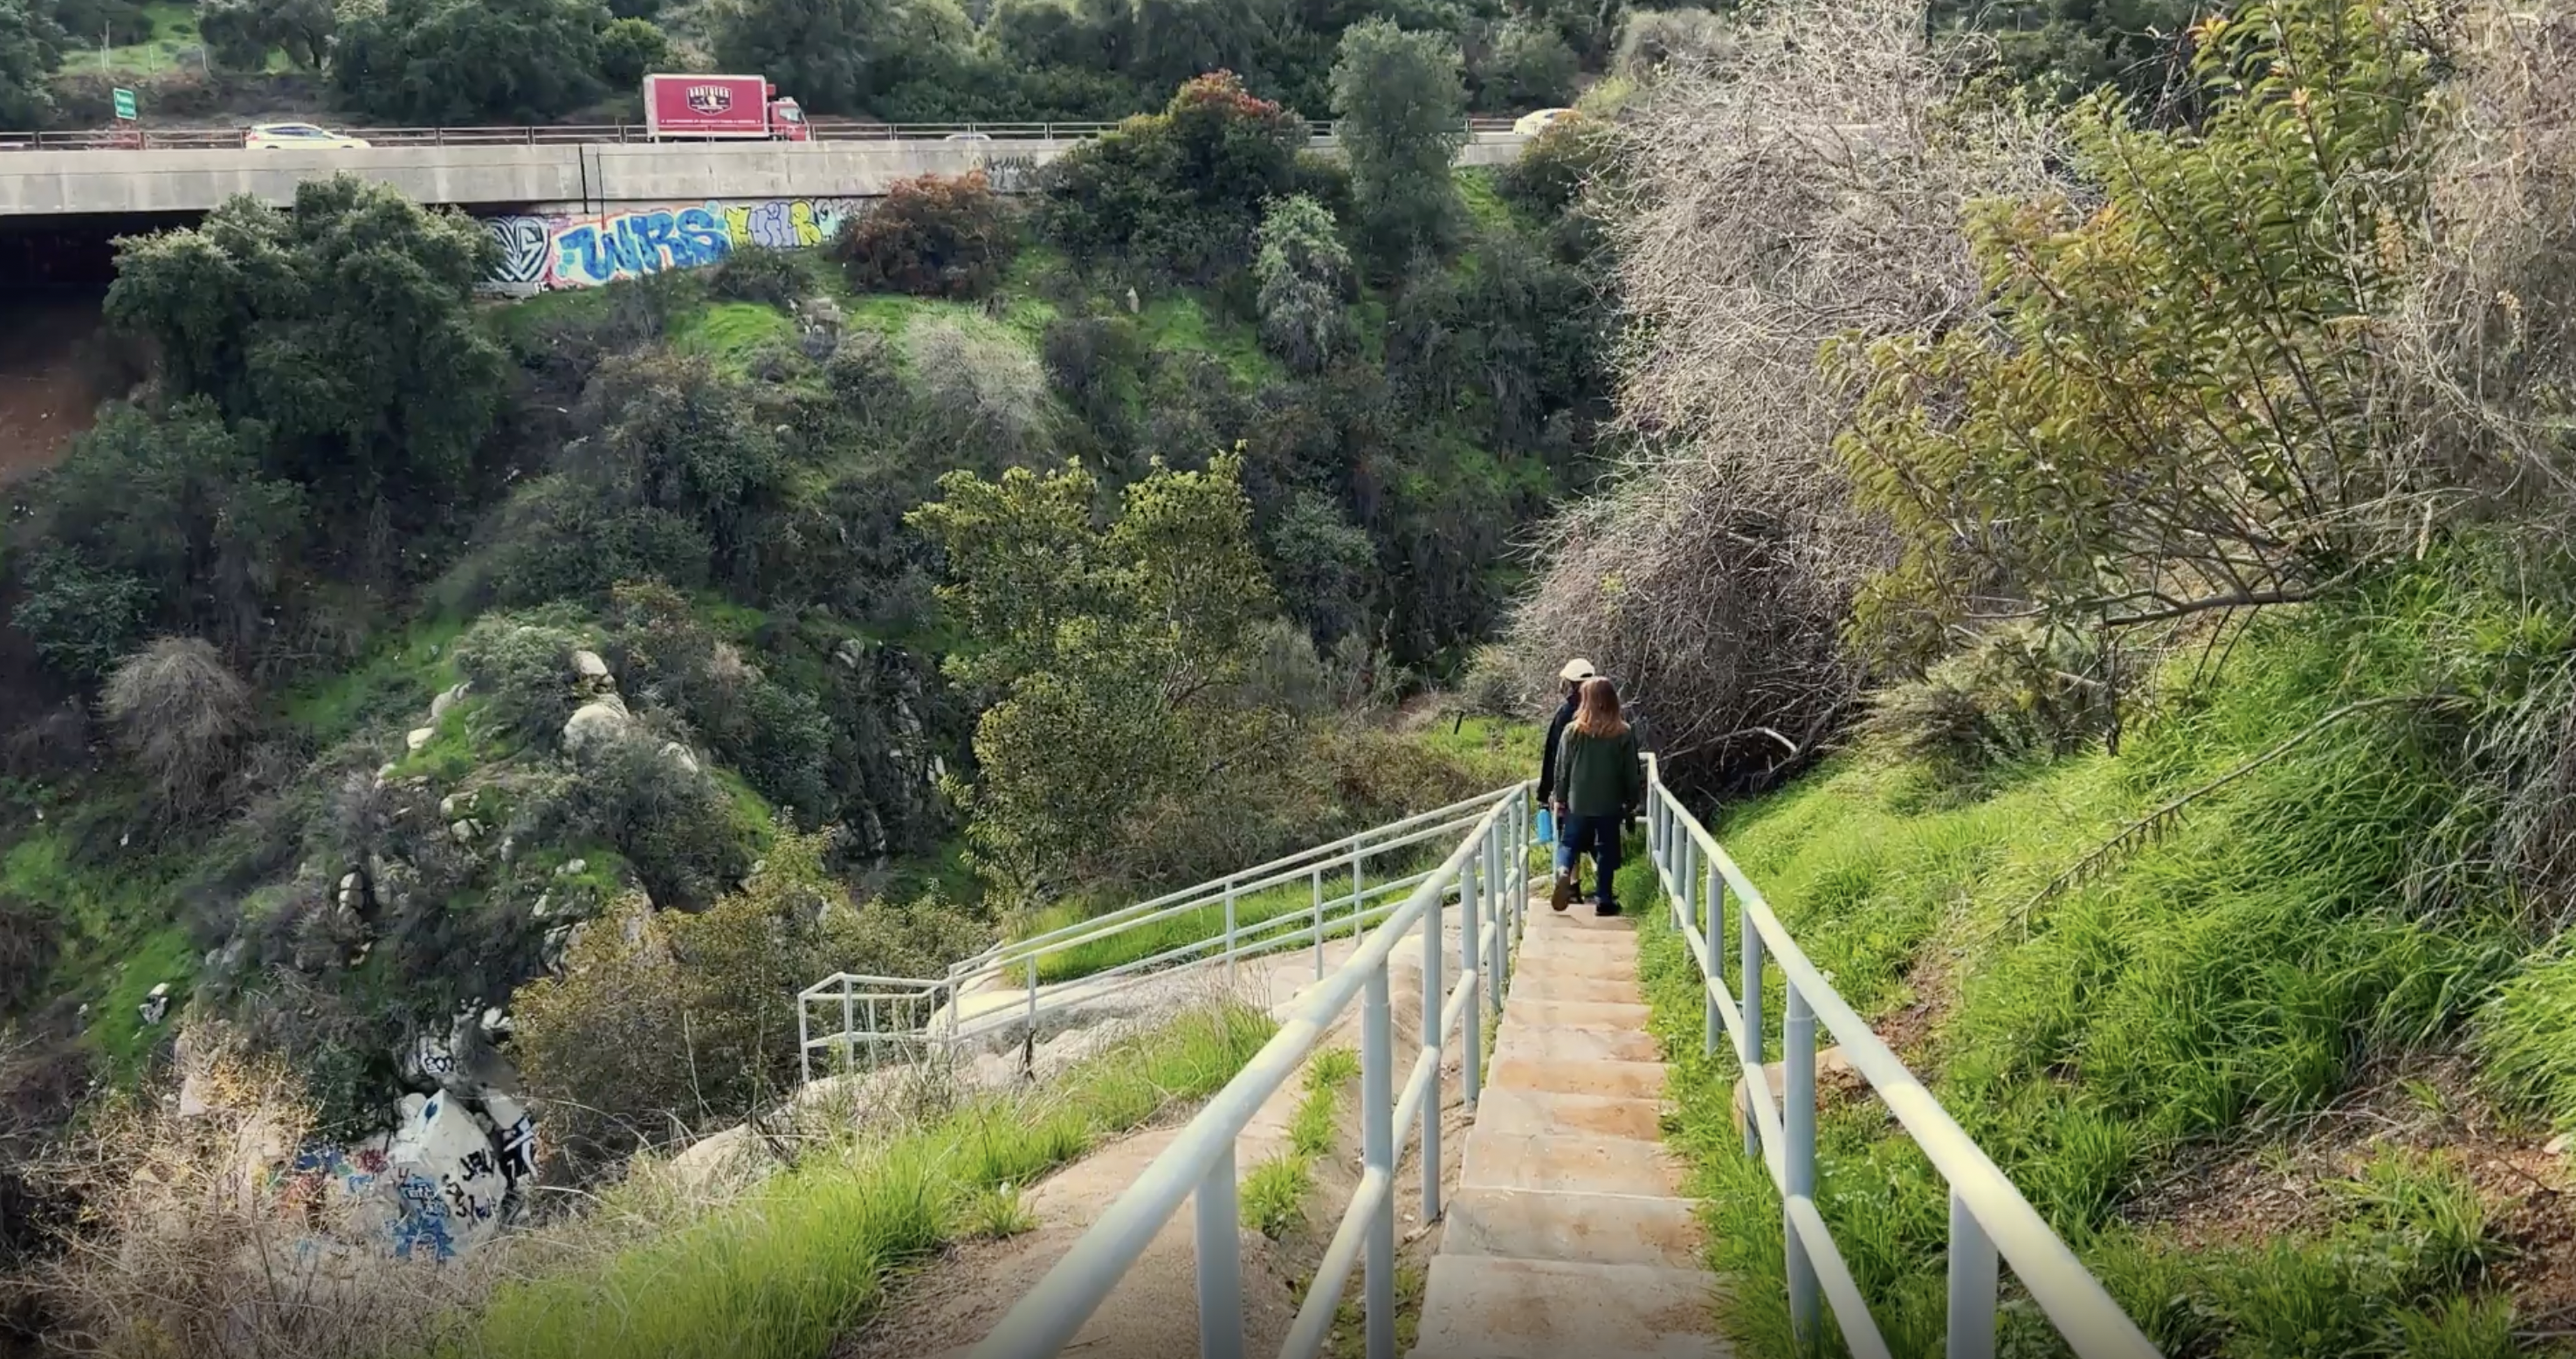 two people descend a staircase surrounded by greenery. a highway is in the background.